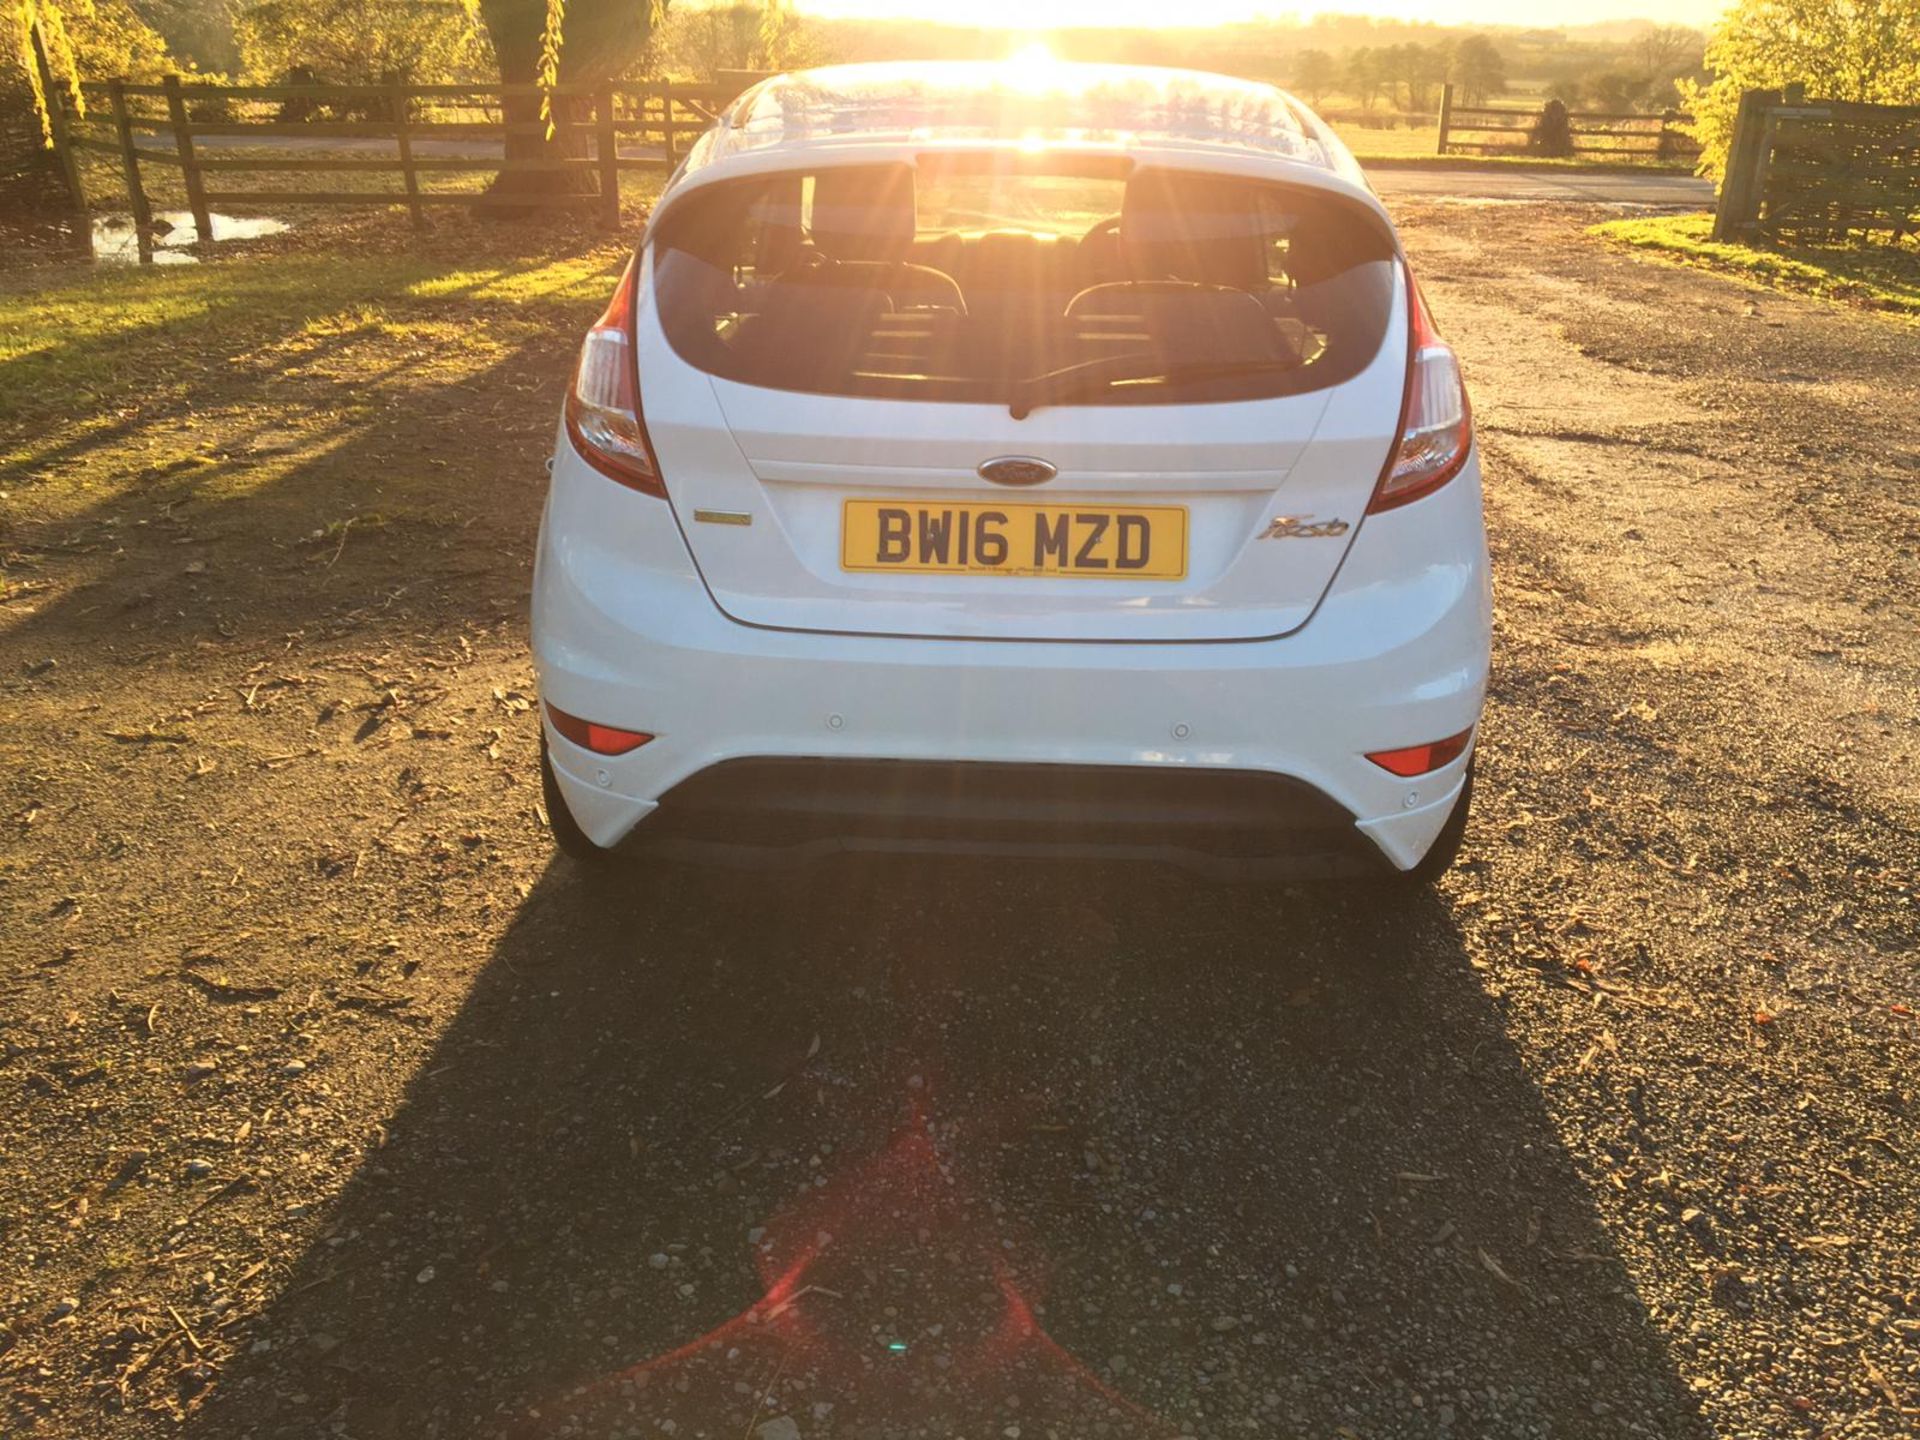 9K MILES! 2016 FORD FIESTA ST-LINE 1.0L ECOBOOST 140 PETROL WHITE 3 DR, SHOWING 0 FORMER KEEPERS - Image 5 of 9